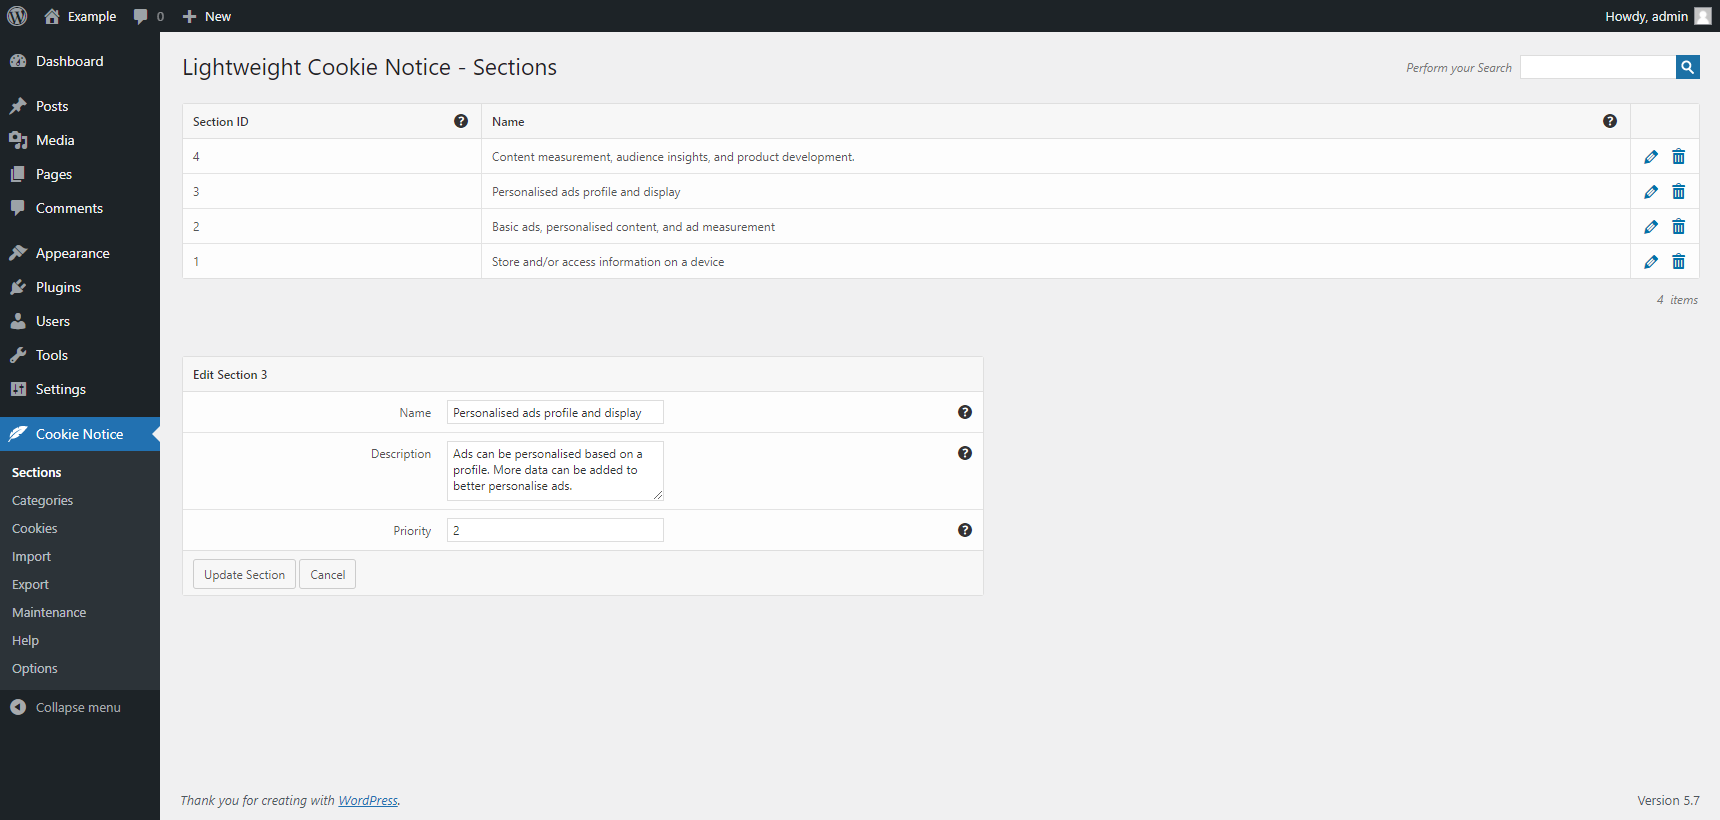 "Sections" menu of the Lightweight Cookie Notice plugin for WordPress.